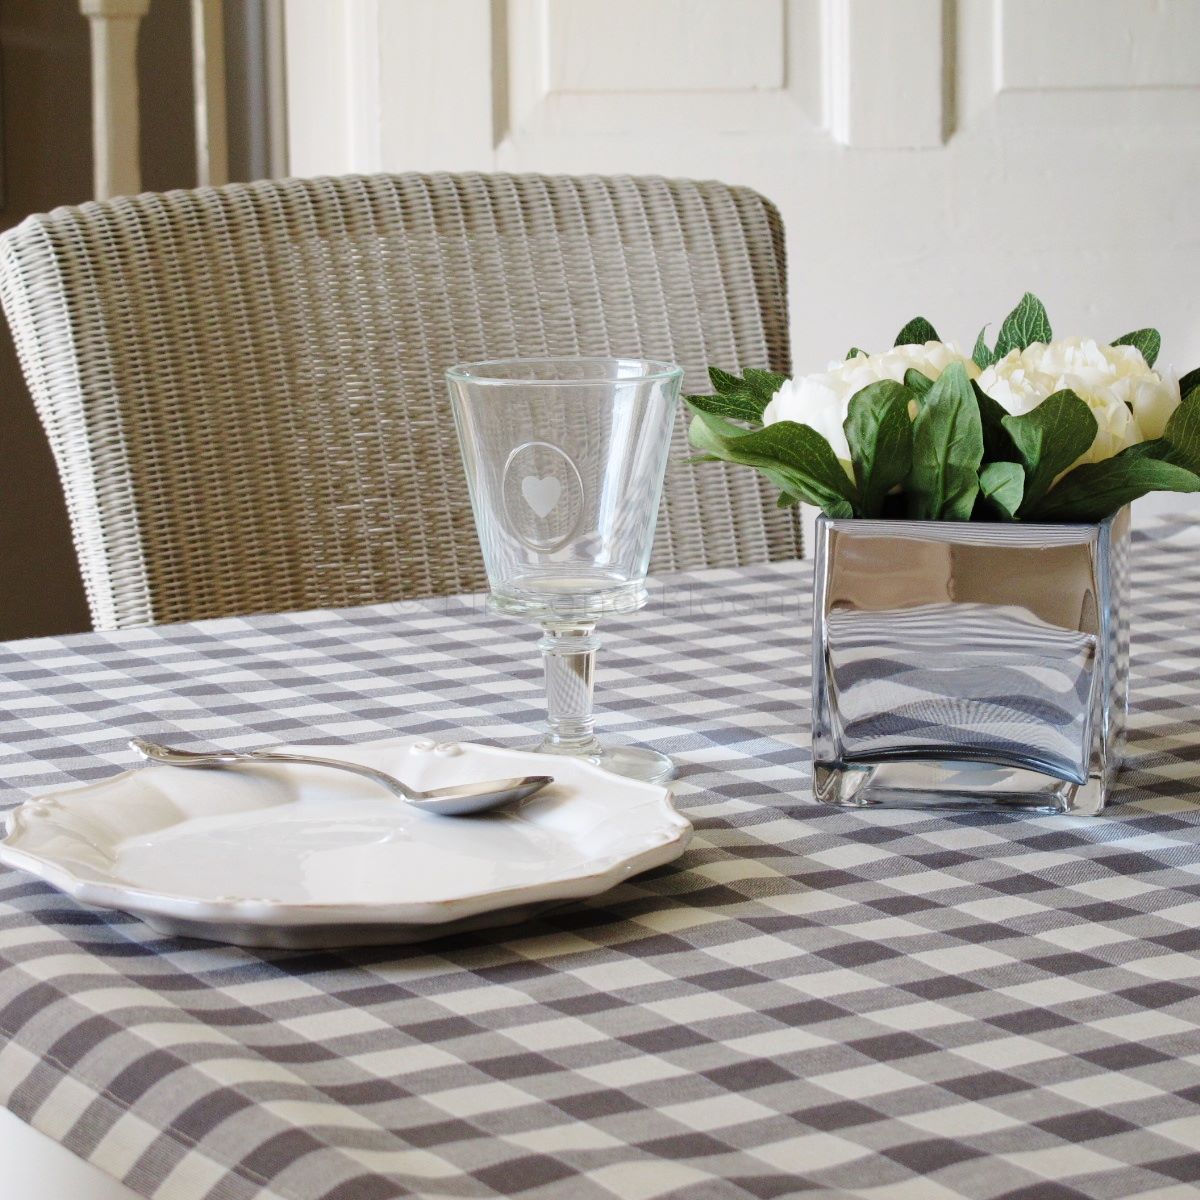 Charcoal check table cloth | Bliss and Bloom